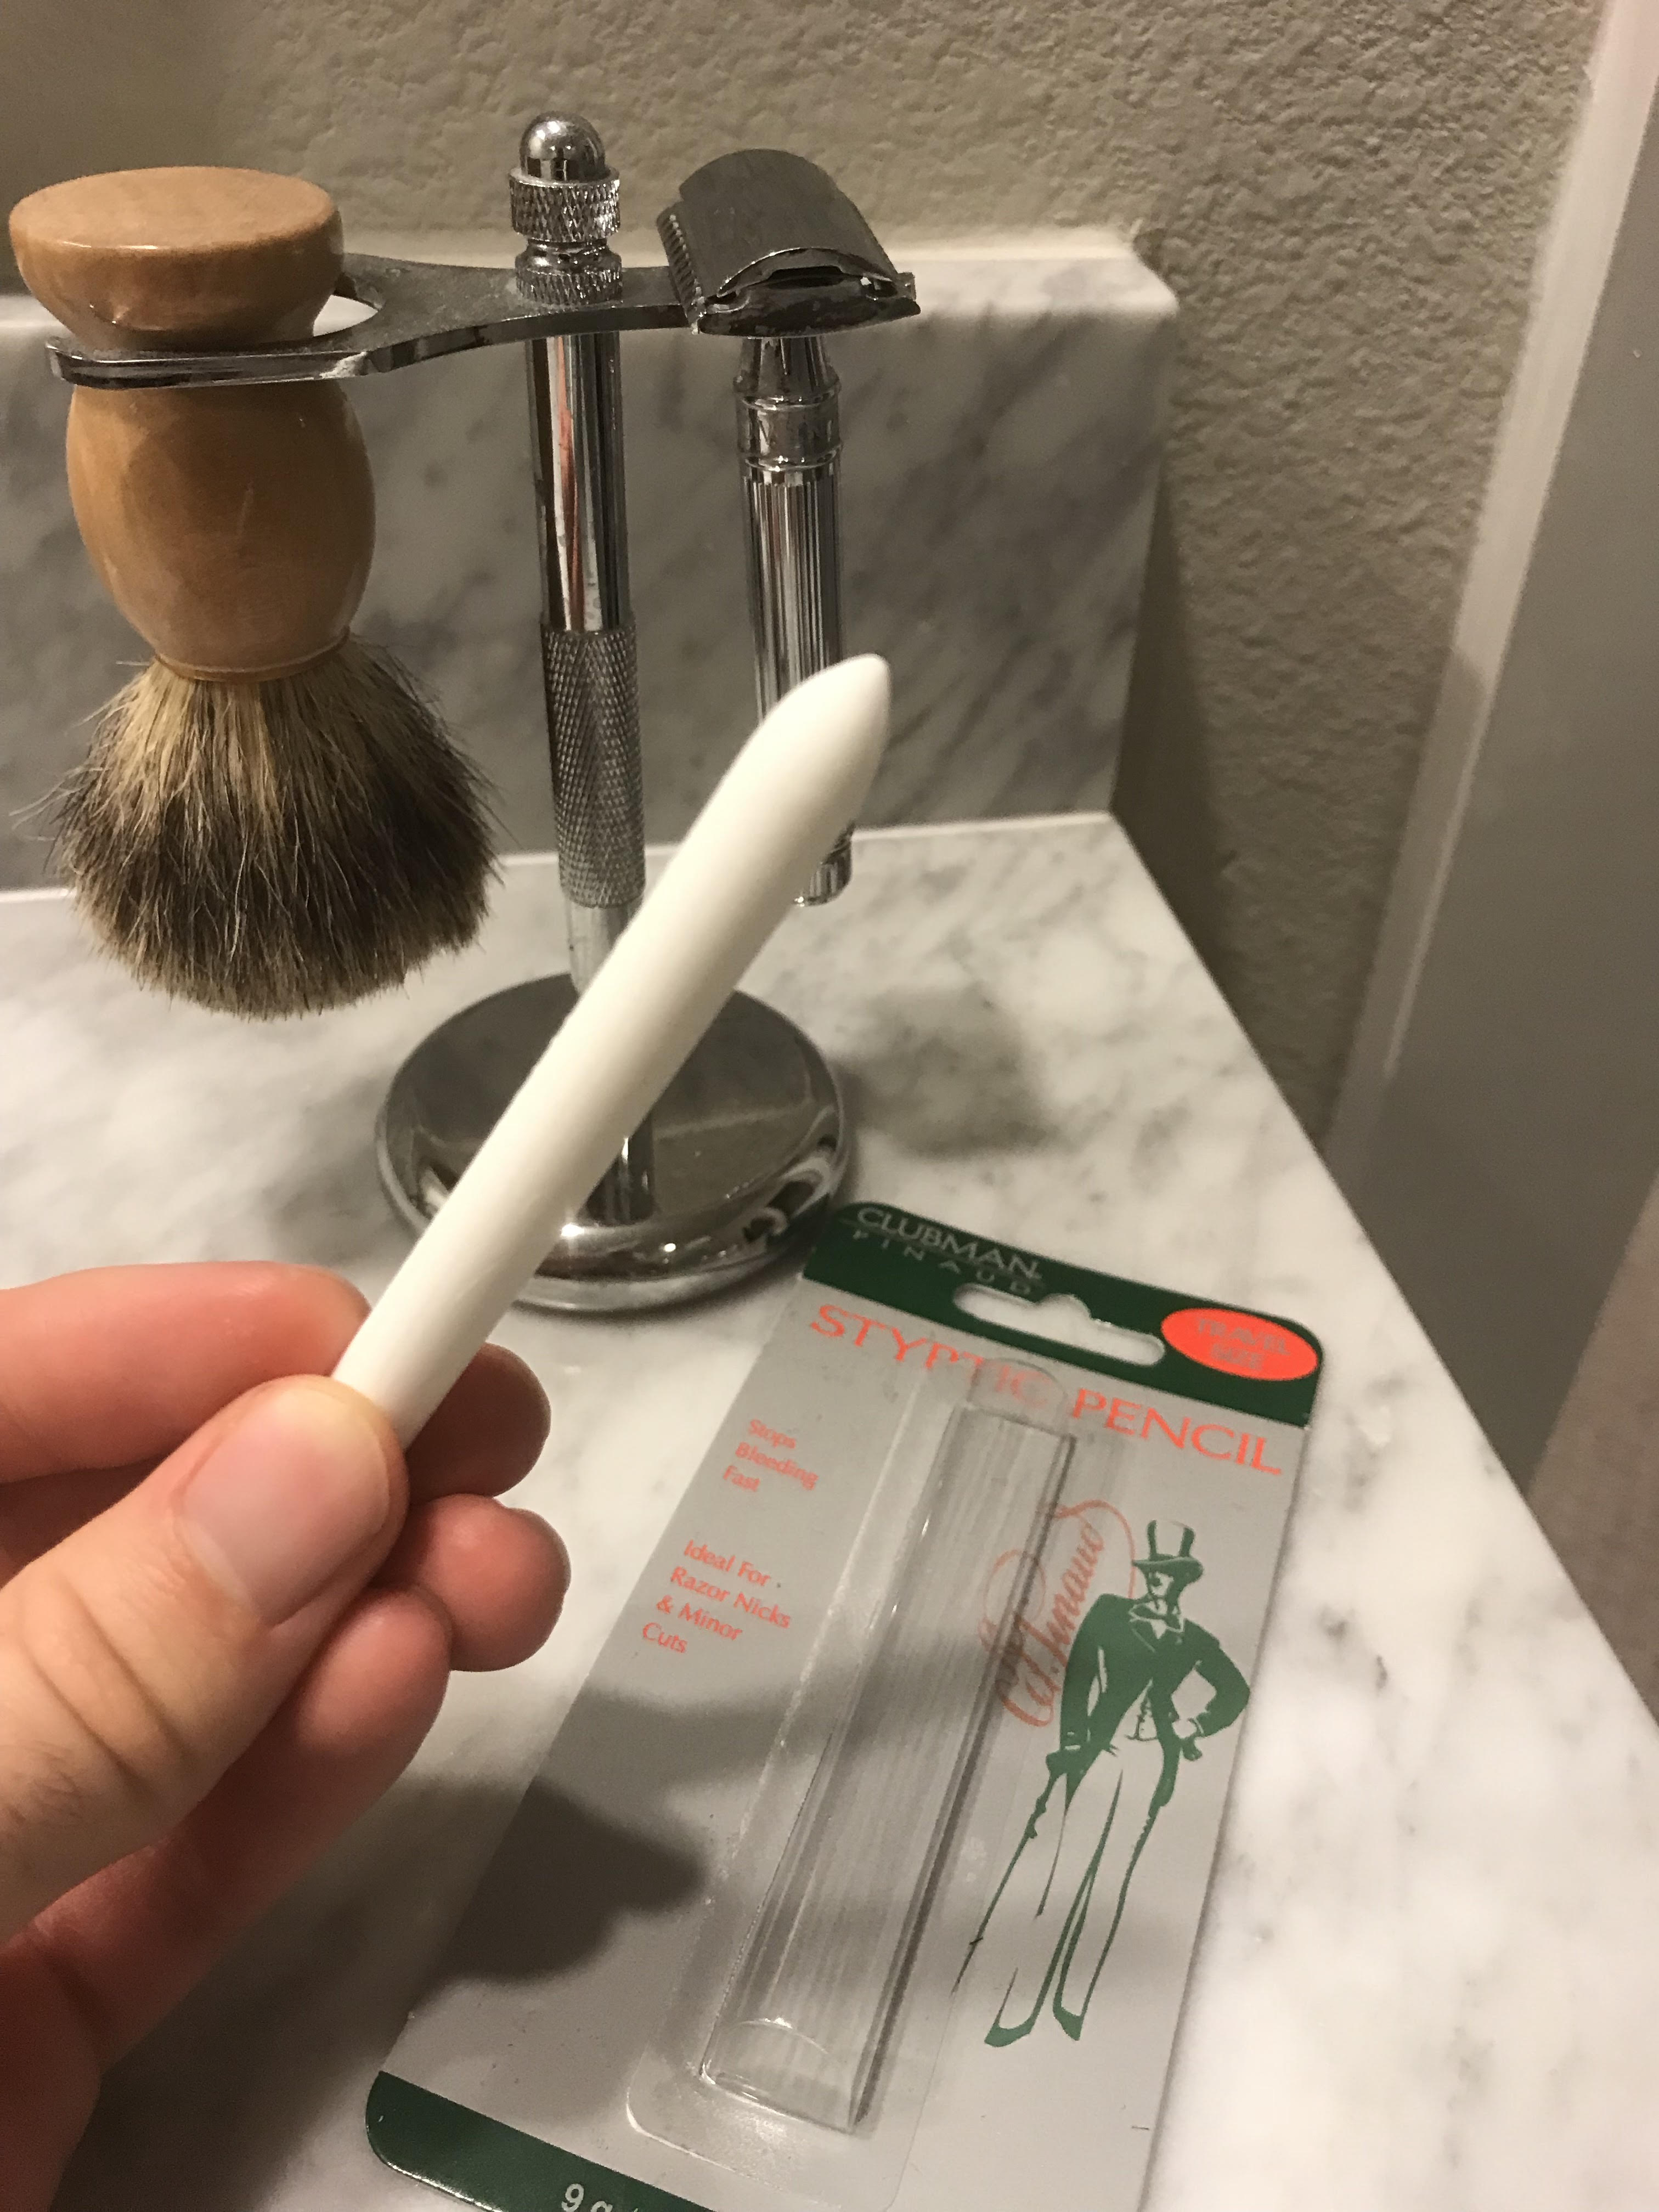 How To Deal With Nicks & Cuts From Shaving